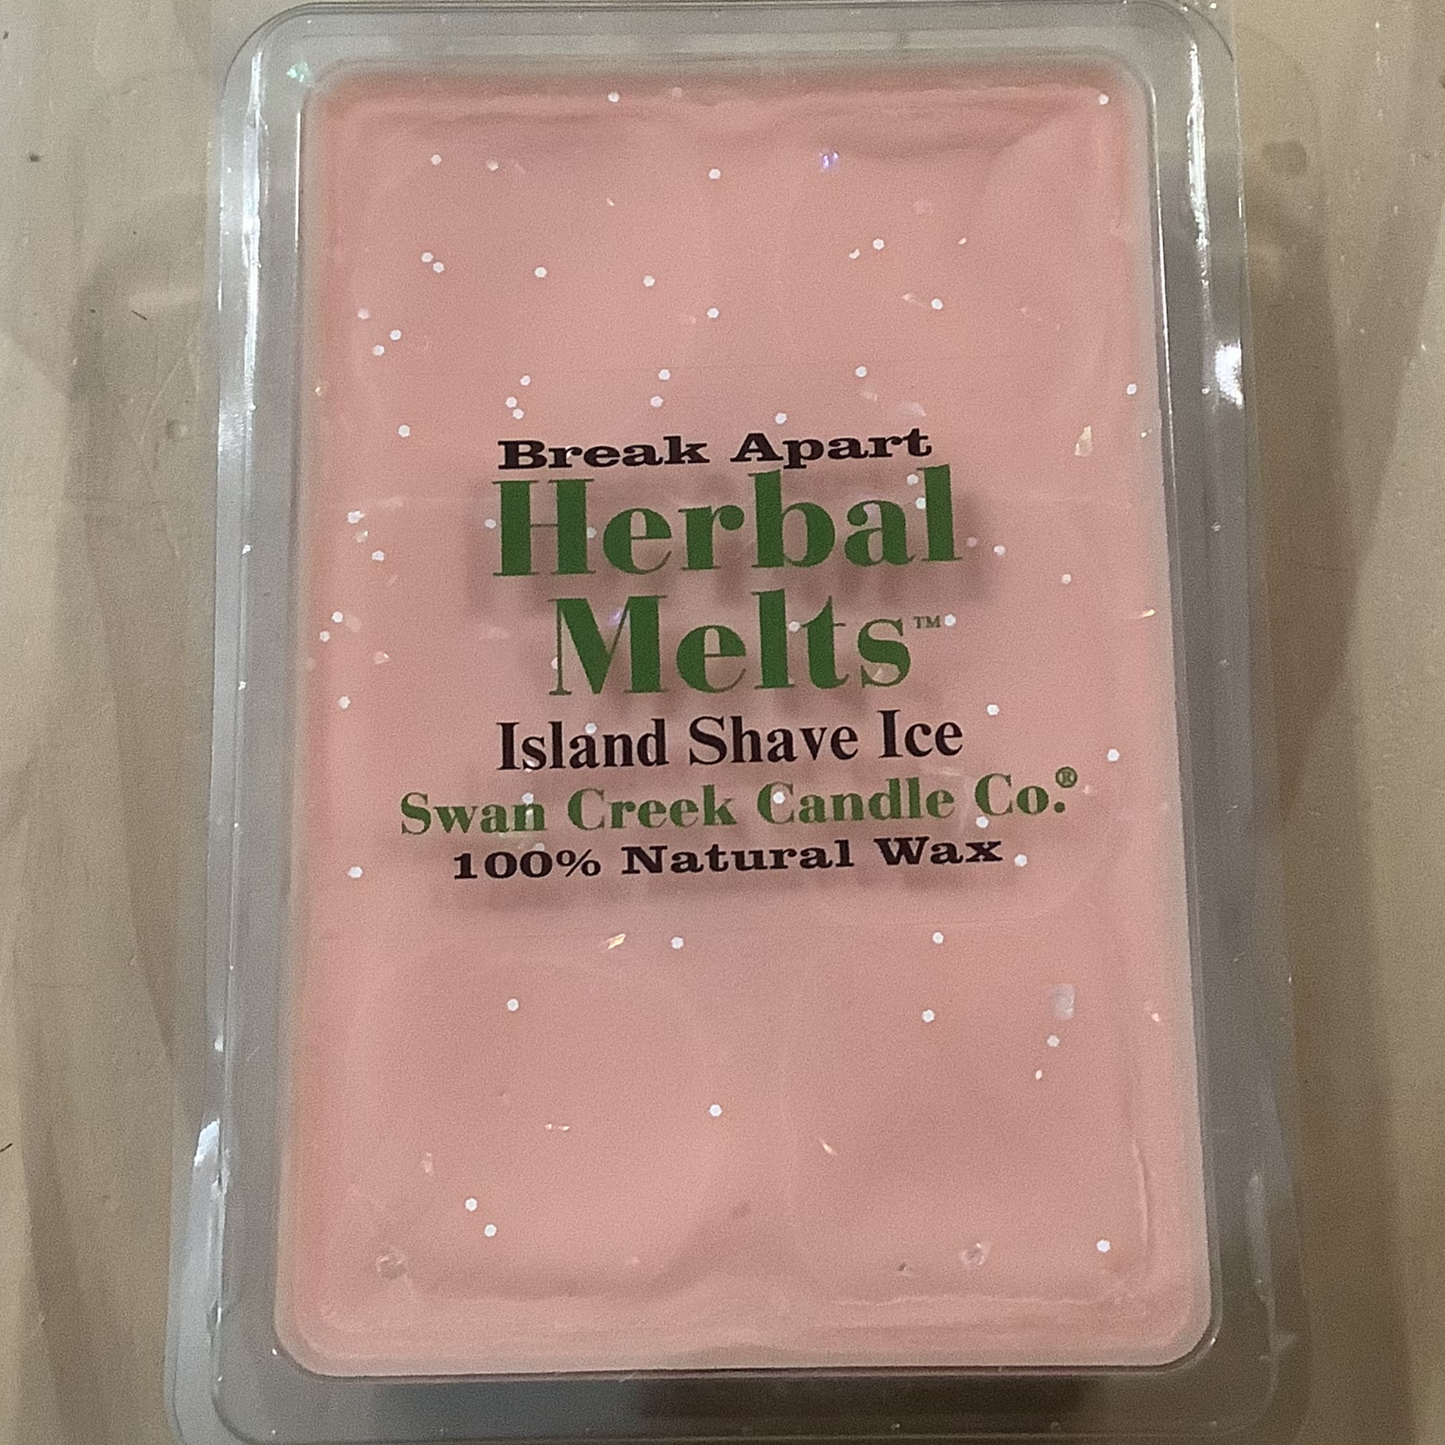 Island Shave Ice Herbal Melts